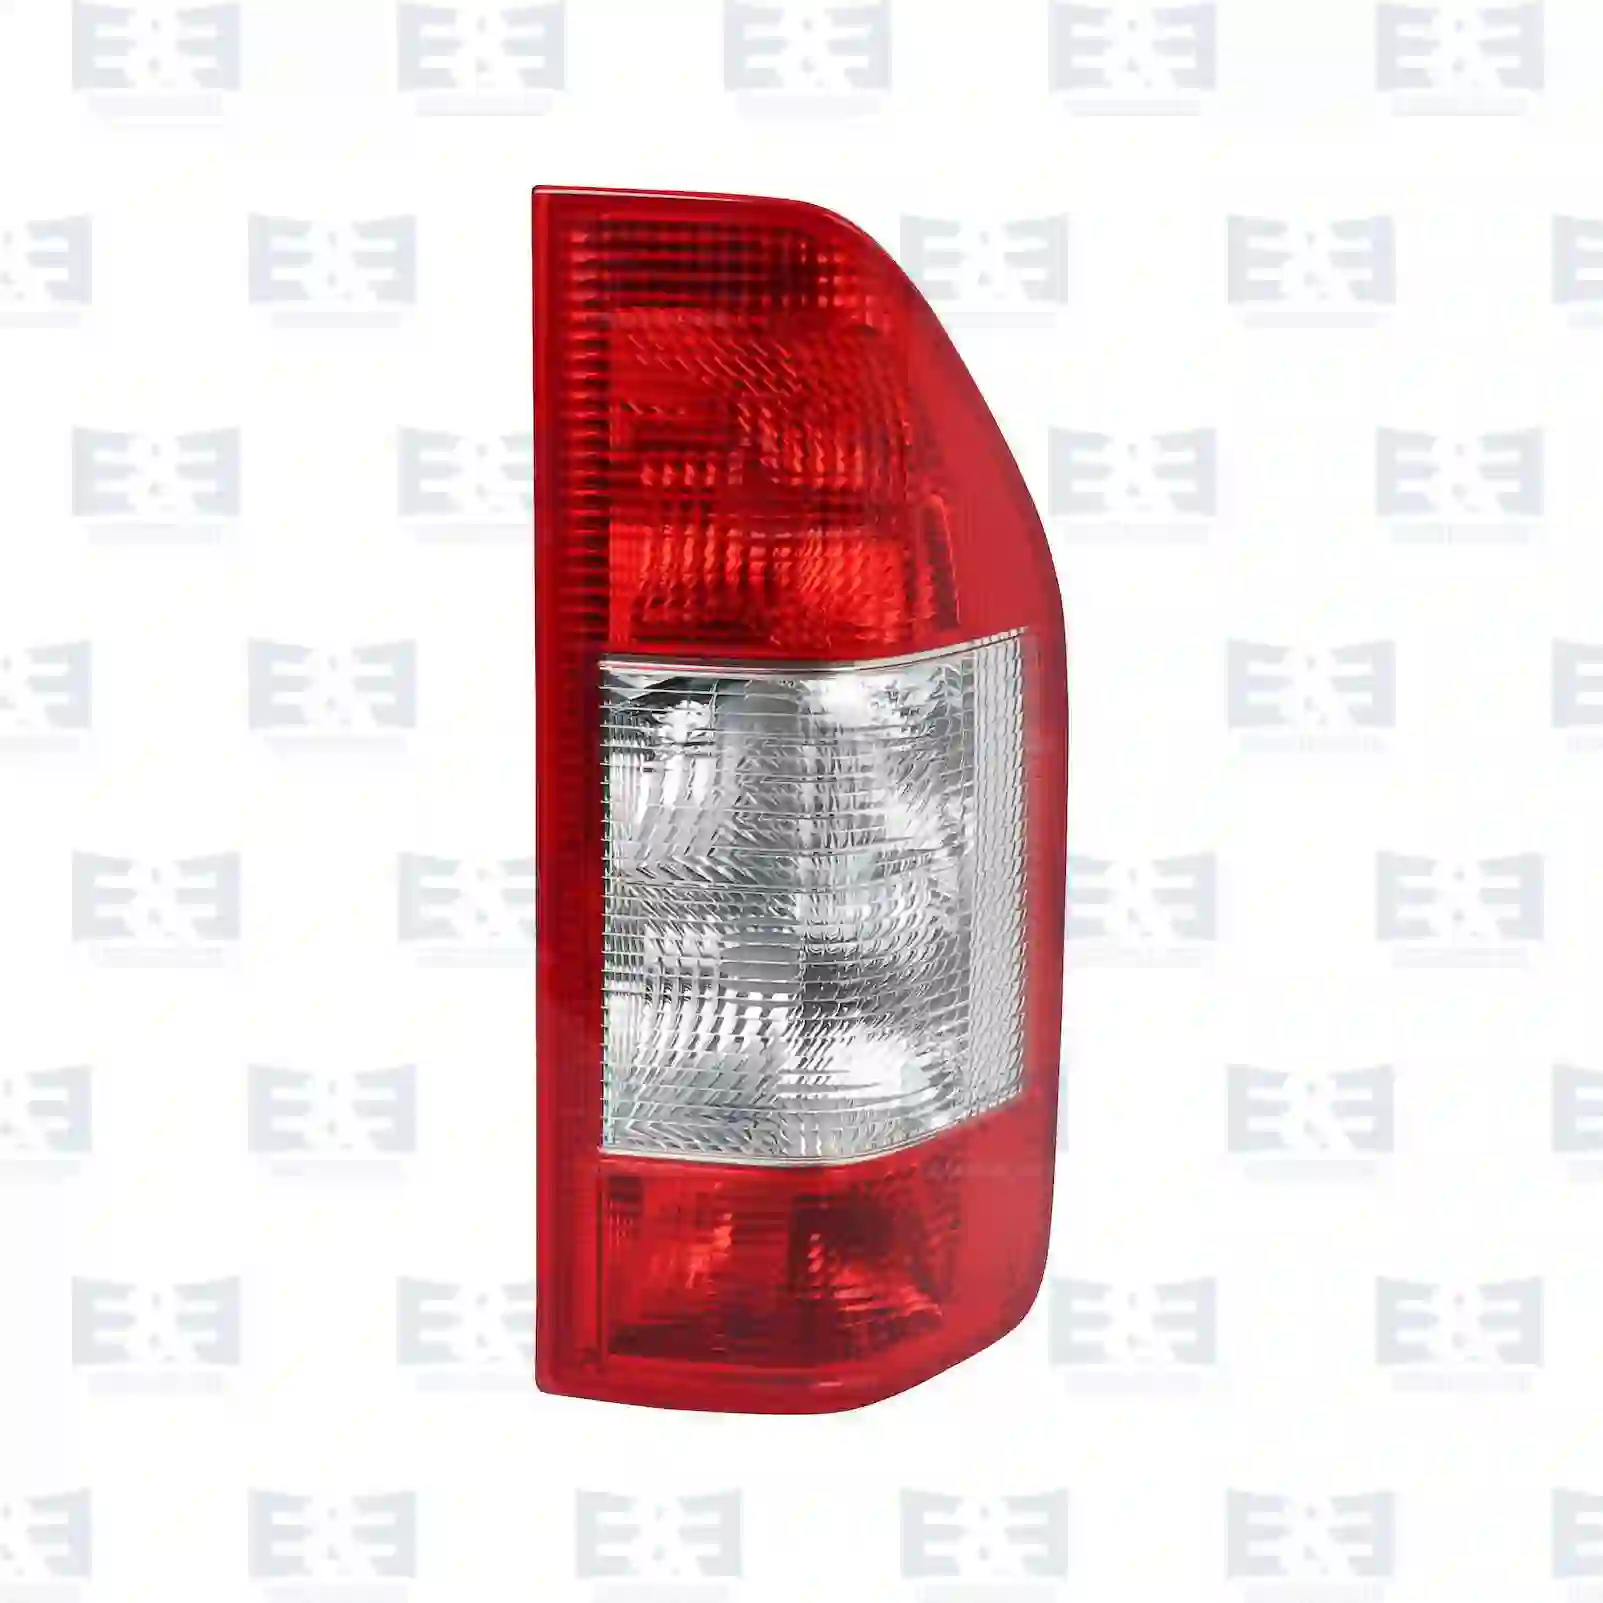 Tail lamp, right, without lamp carrier, 2E2299870, 8261656 ||  2E2299870 E&E Truck Spare Parts | Truck Spare Parts, Auotomotive Spare Parts Tail lamp, right, without lamp carrier, 2E2299870, 8261656 ||  2E2299870 E&E Truck Spare Parts | Truck Spare Parts, Auotomotive Spare Parts